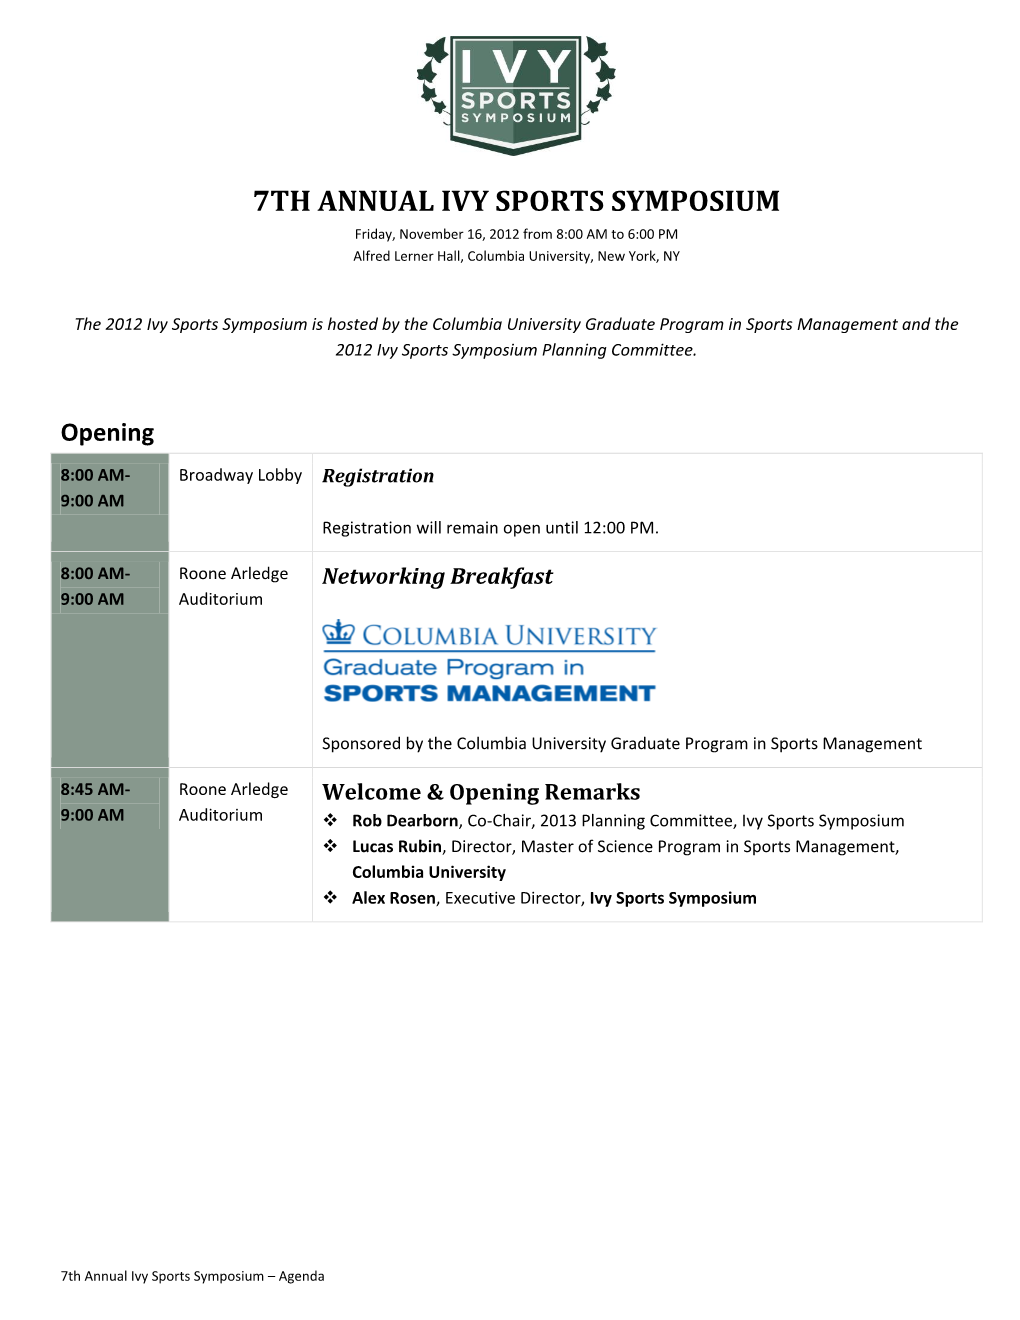 7TH ANNUAL IVY SPORTS SYMPOSIUM Friday, November 16, 2012 from 8:00 AM to 6:00 PM Alfred Lerner Hall, Columbia University, New York, NY